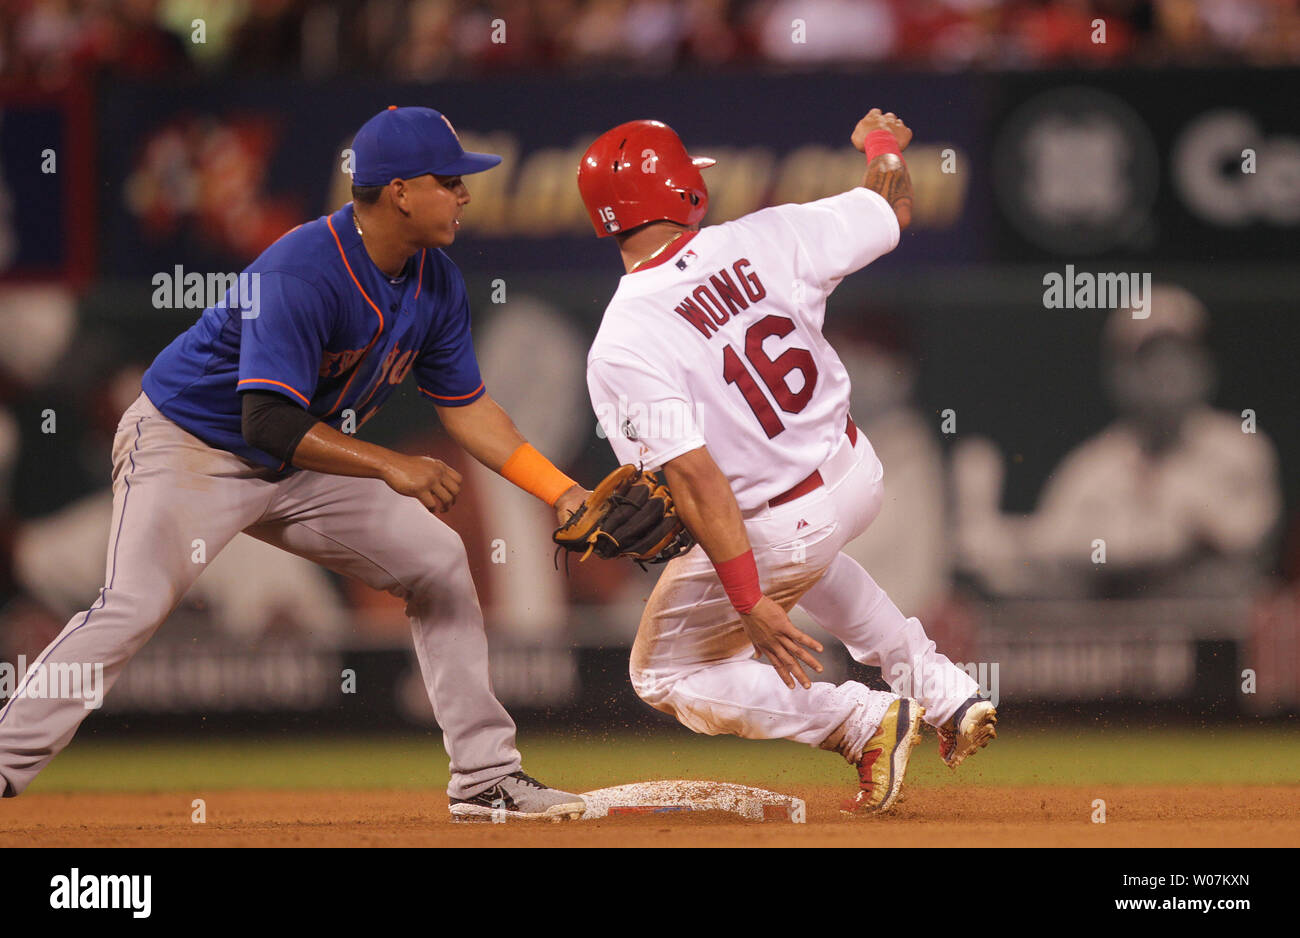 New York Mets Ruben Tejada tags St. Louis Cardinals Kolten Wong without the ball as Wong steals second base in the sixth inning at Busch Stadium in St. Louis on July 17, 2015. Wong went to third as the ball went to center field. Photo by Bill Greenblatt/UPI Stock Photo